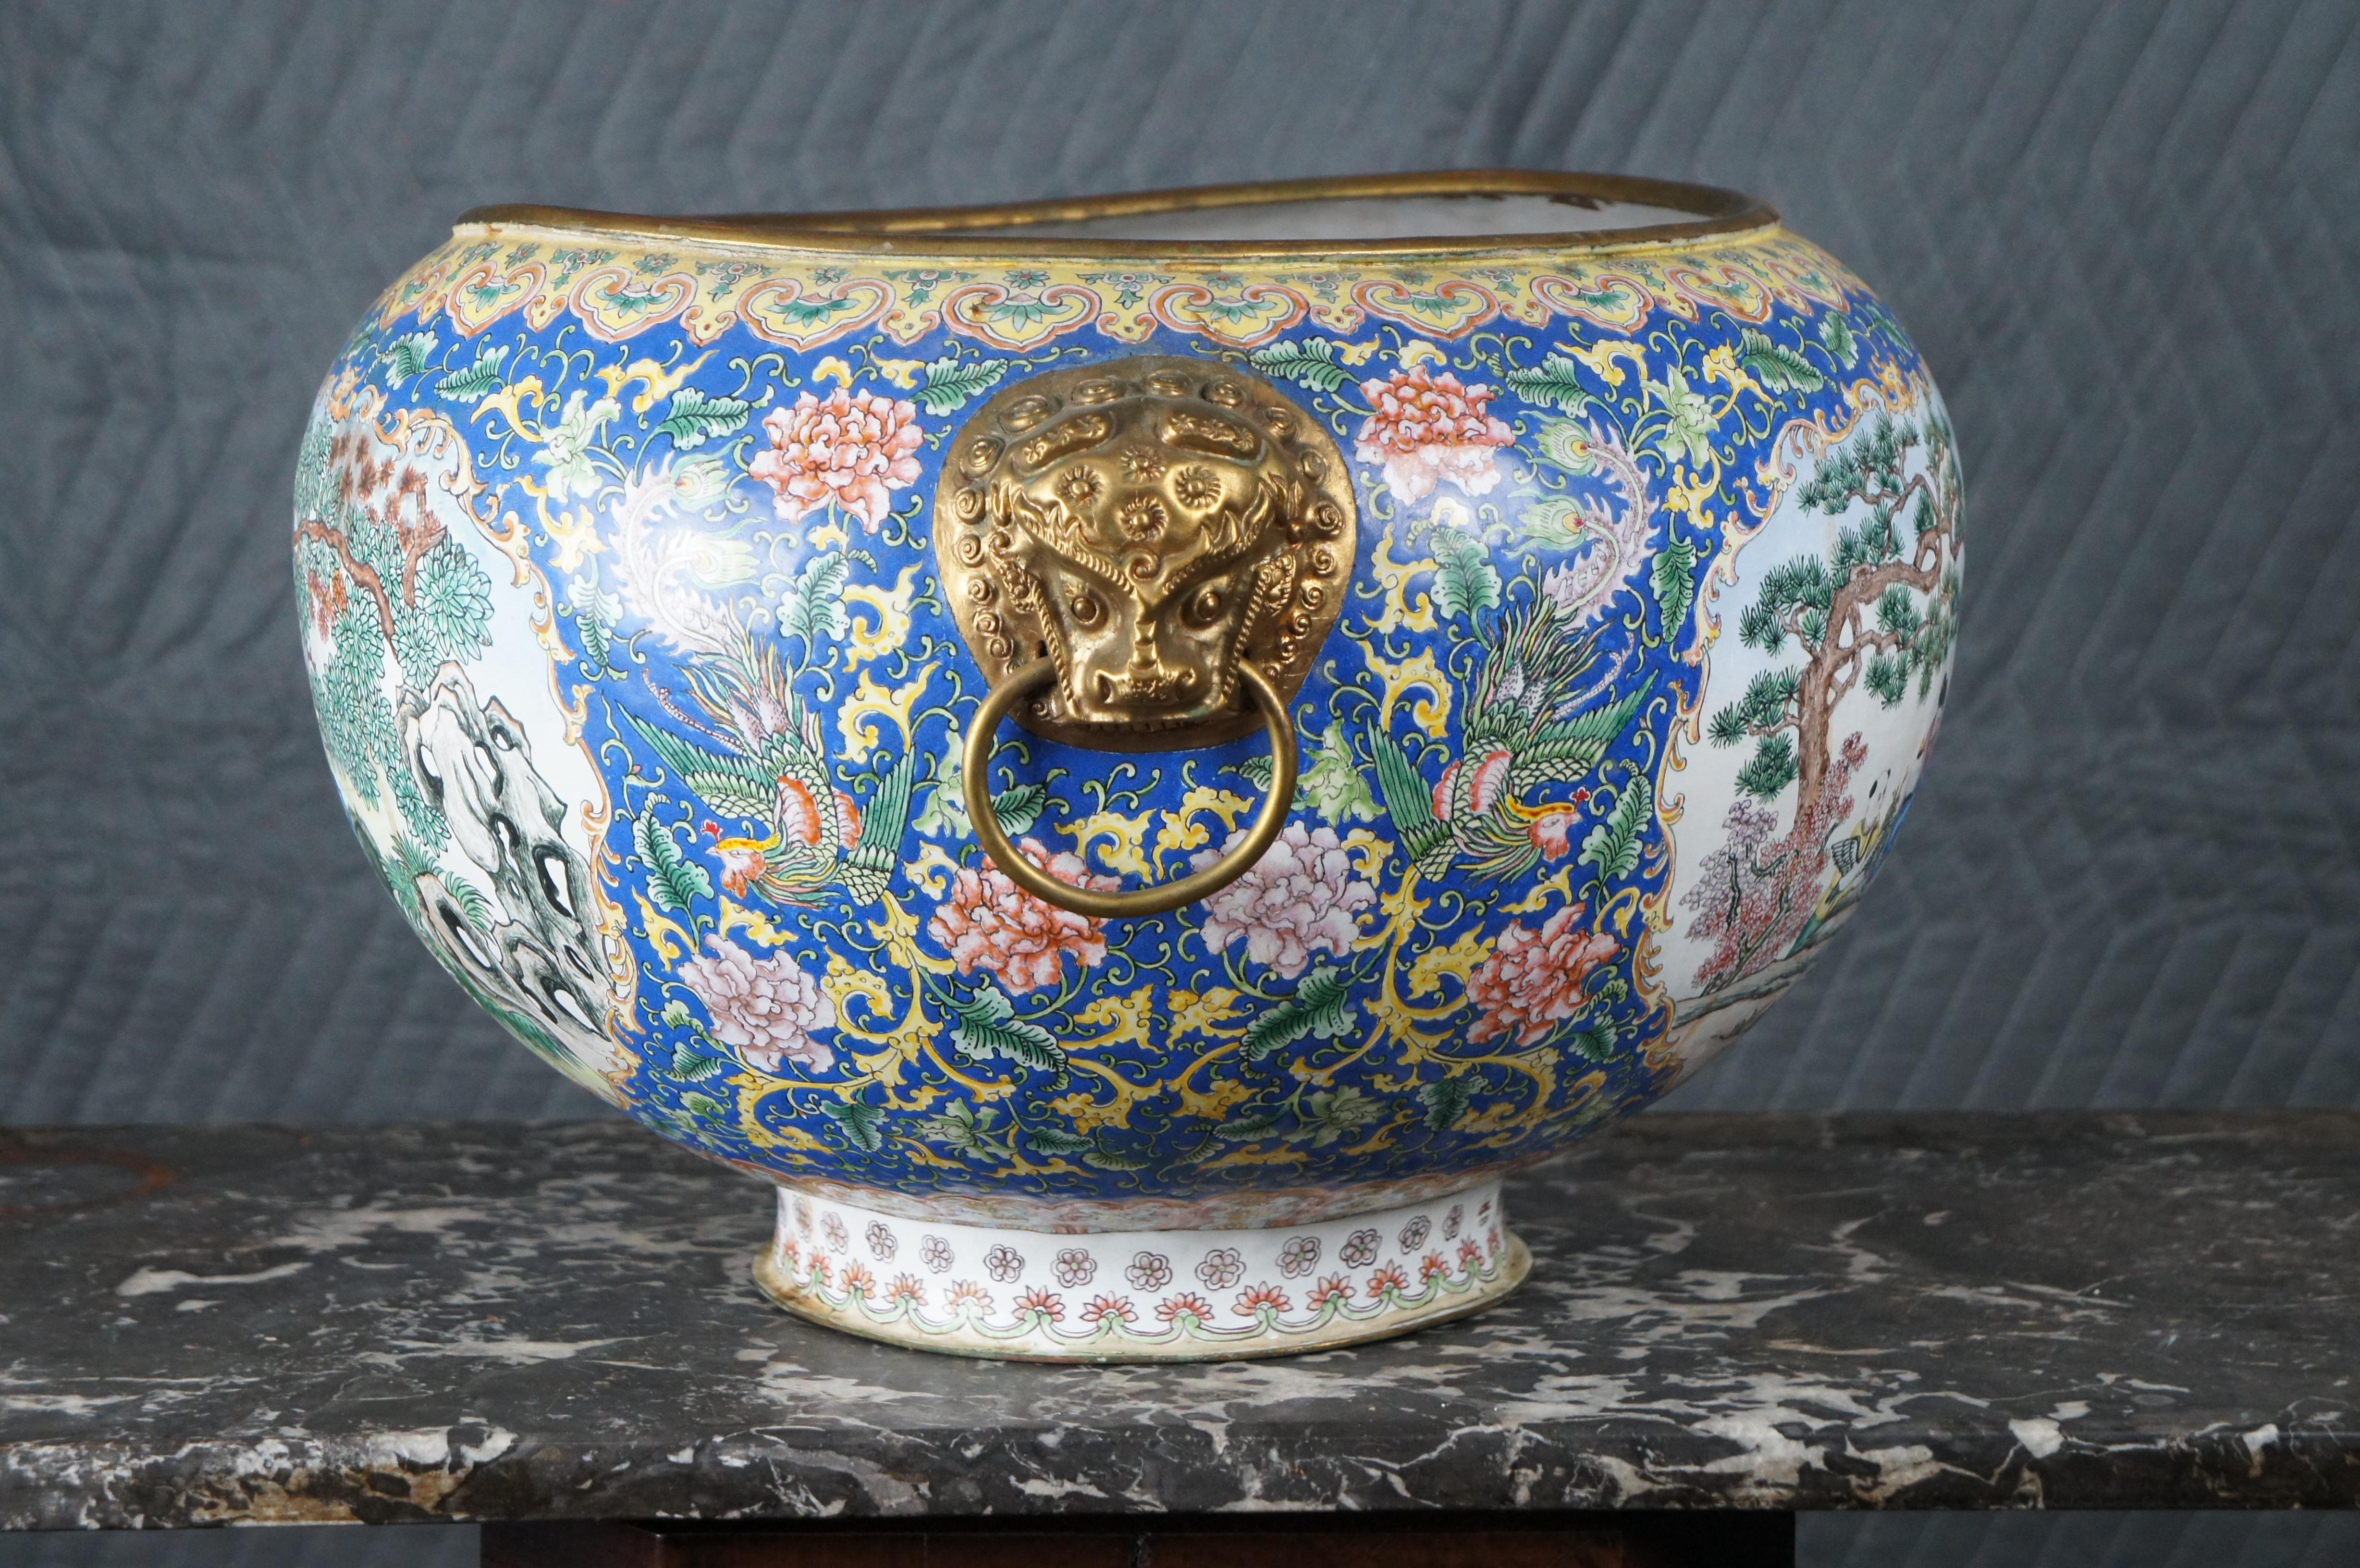 Antique Chinese Canton Enamel on Copper Jaridiniere Fish Bowl Gilt Metal Handles In Good Condition For Sale In Dayton, OH